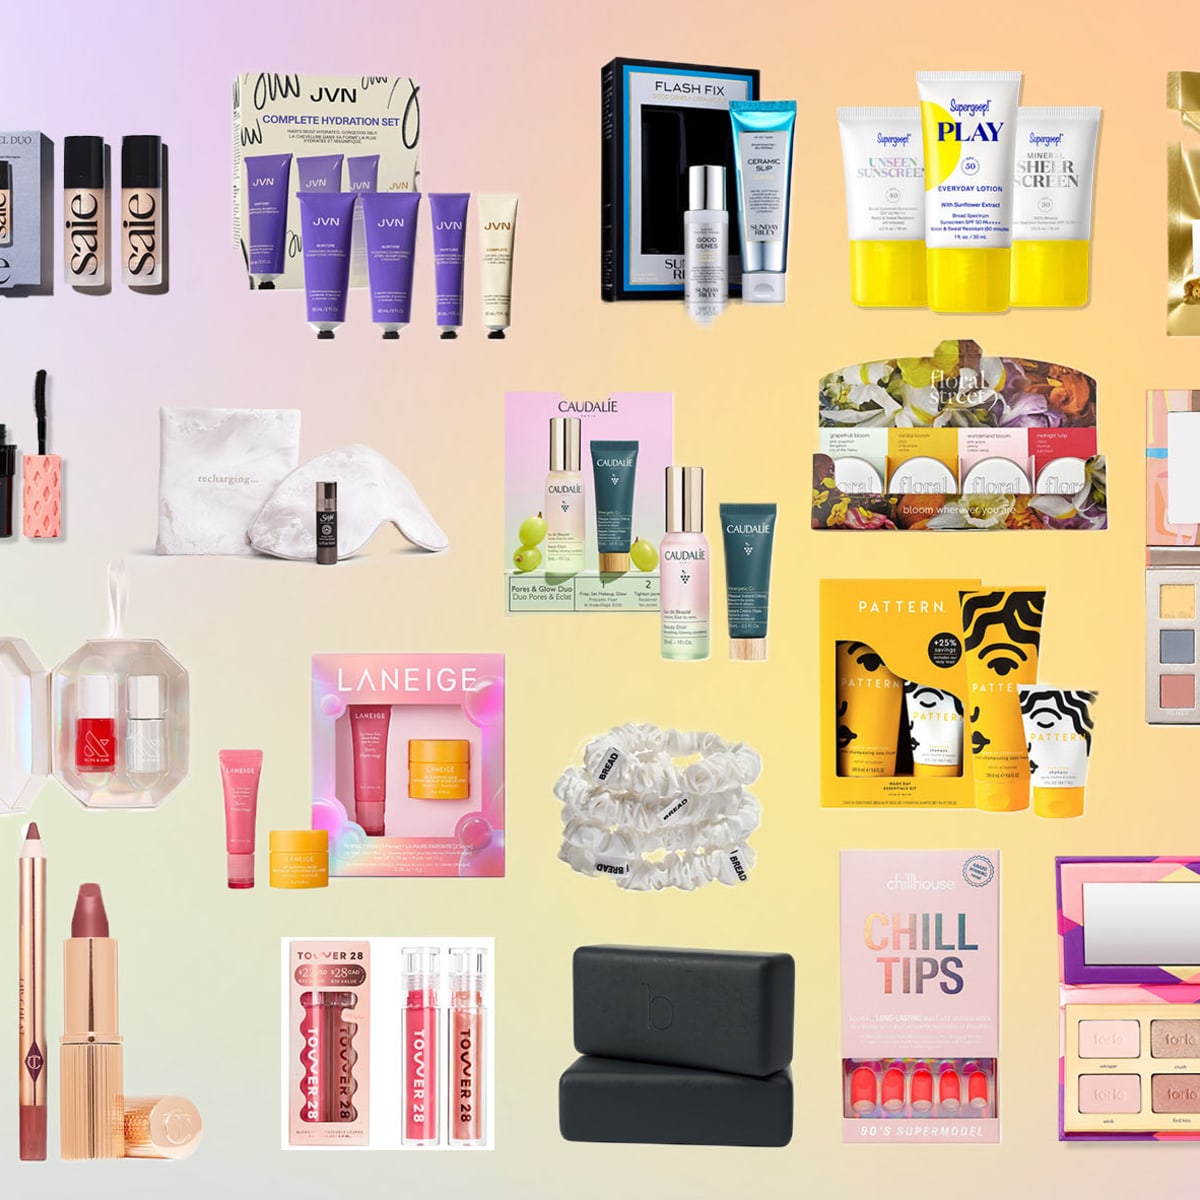 26 Actually-Good Beauty Gifts That Cost $25 or Less - Fashionista